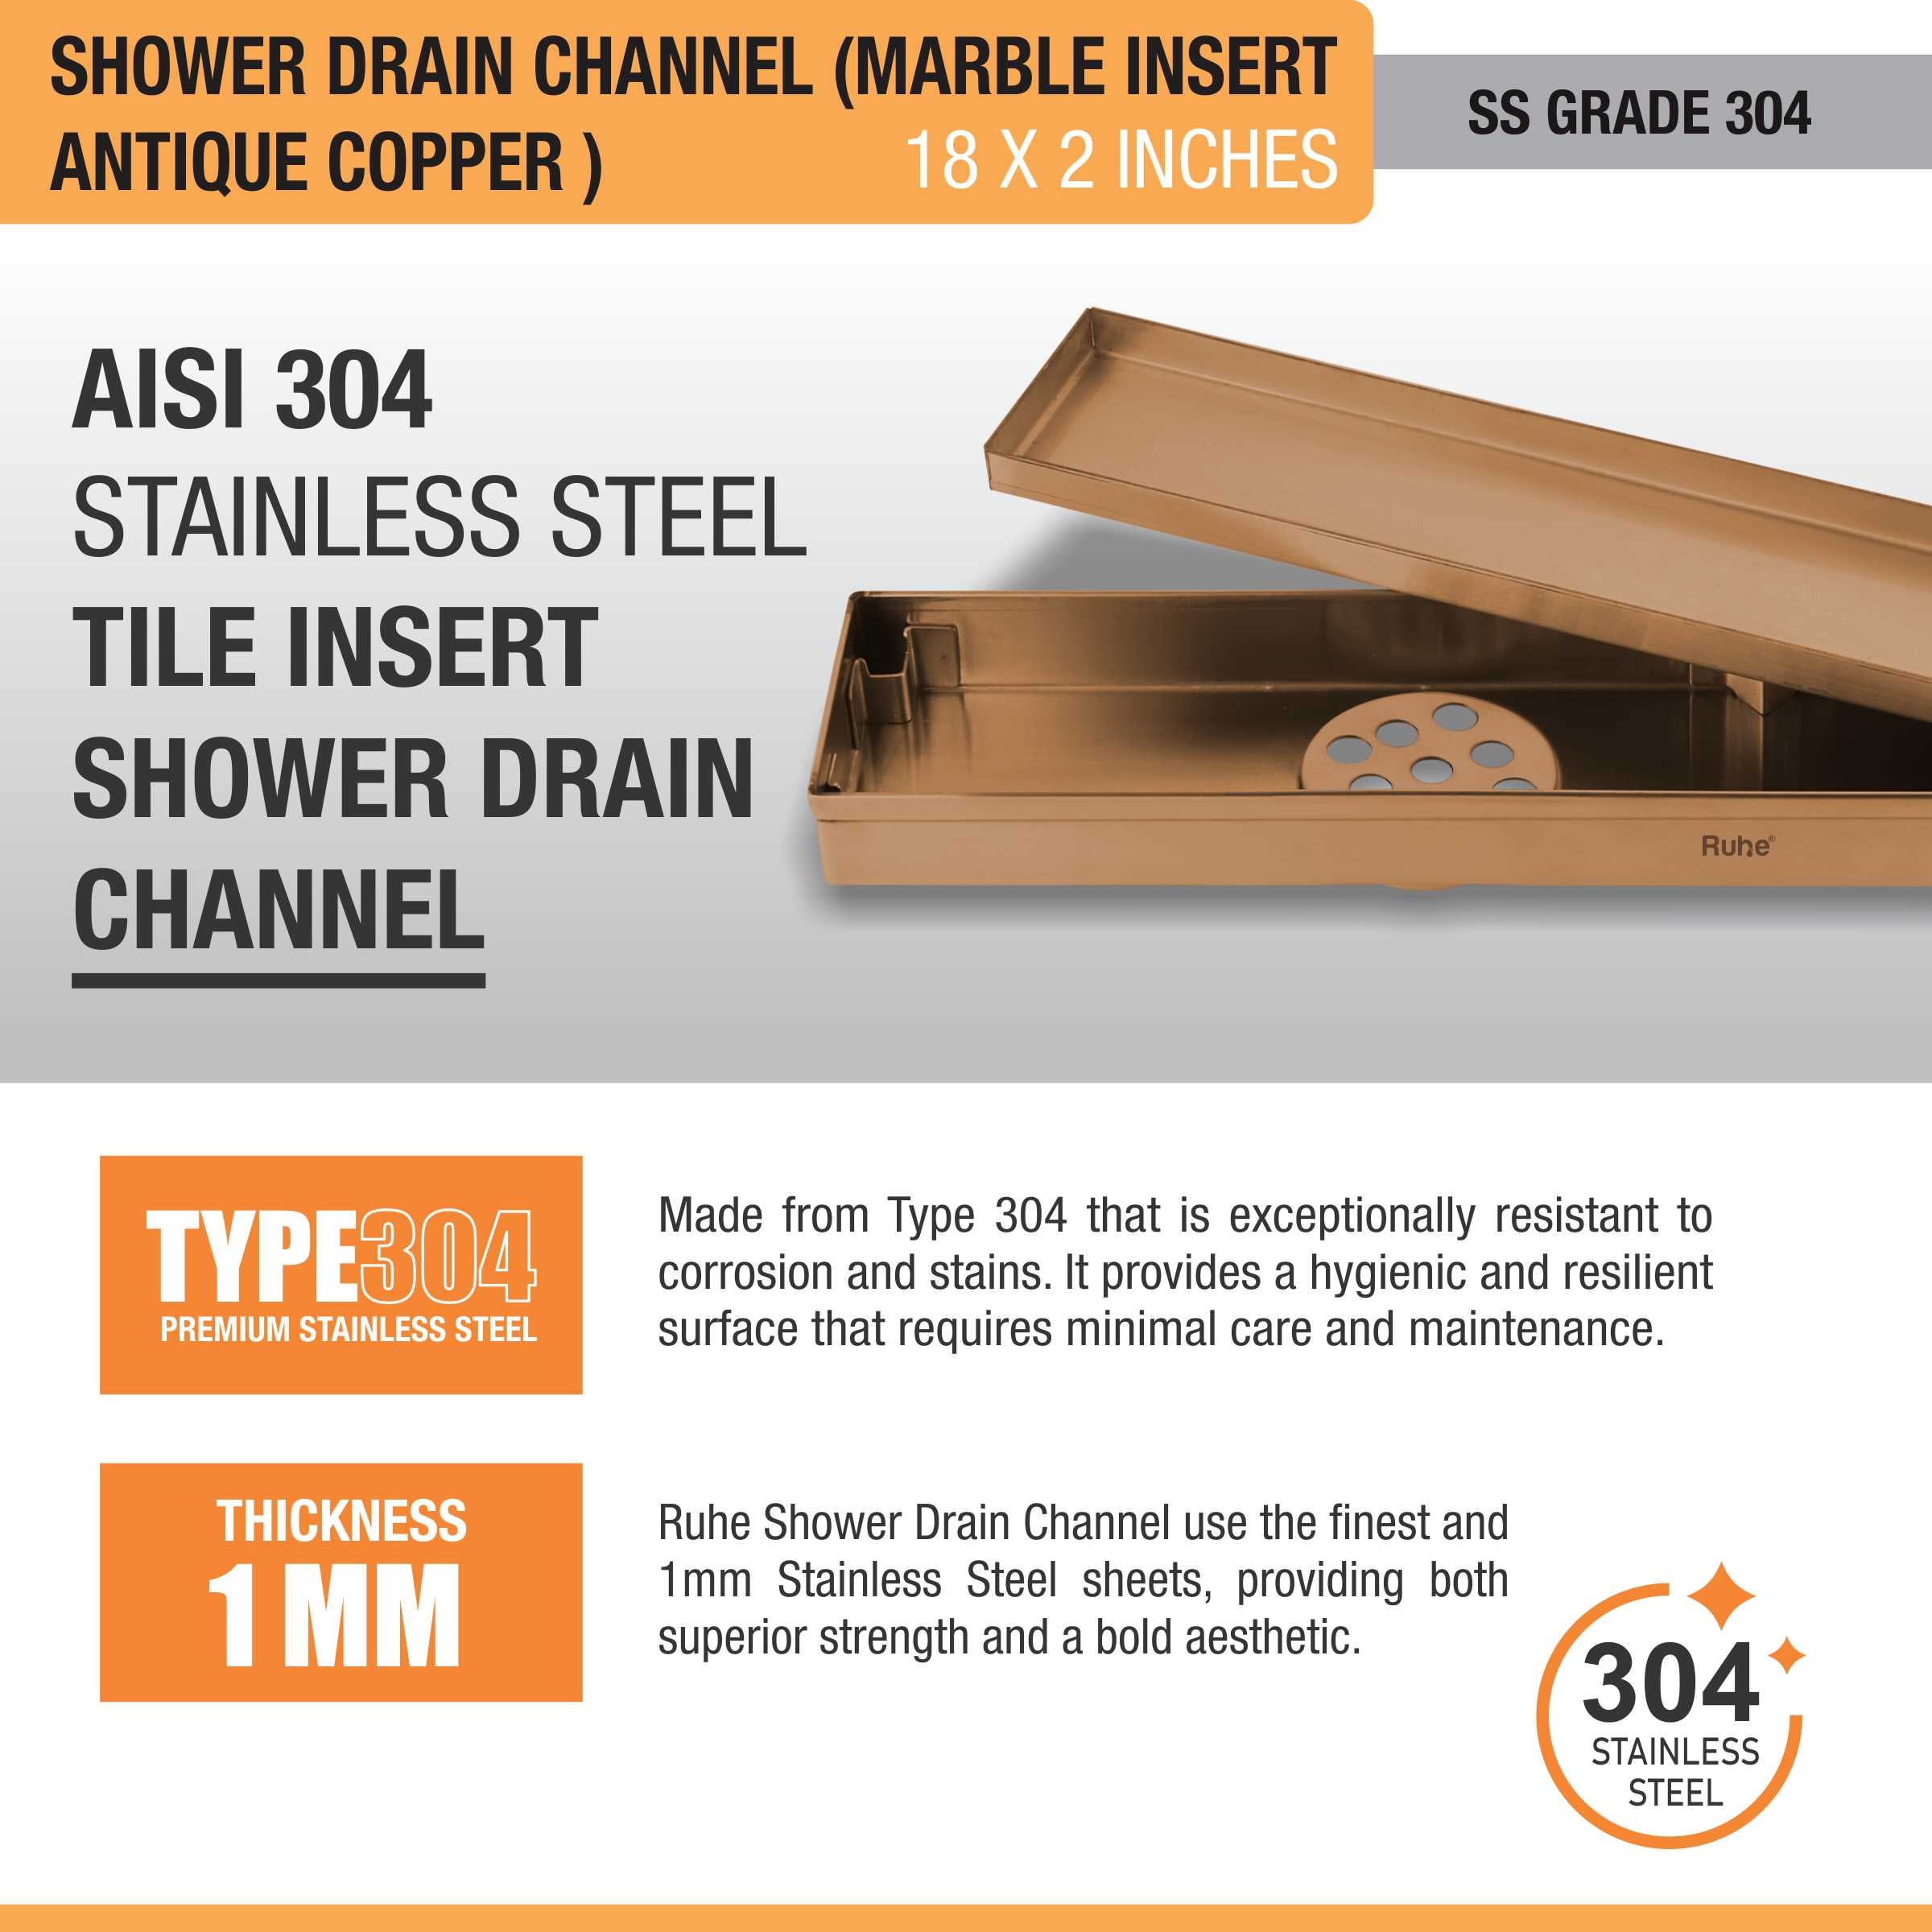 Marble Insert Shower Drain Channel (18 x 2 Inches) ANTIQUE COPPER stainless steel